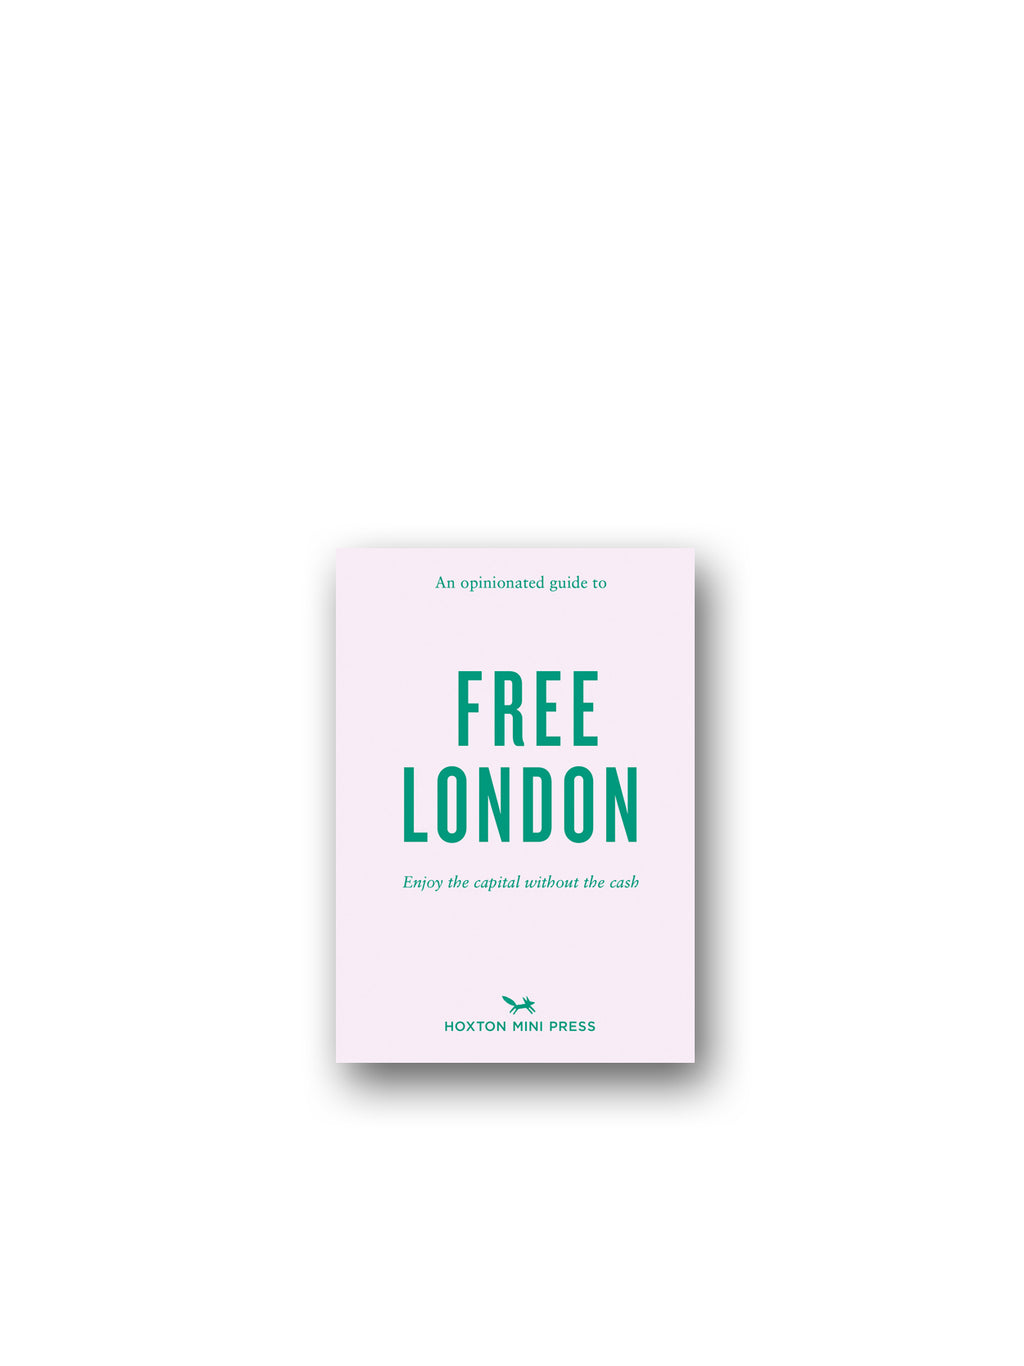 An Opinionated Guide to Free London: Enjoy the capital without the cash